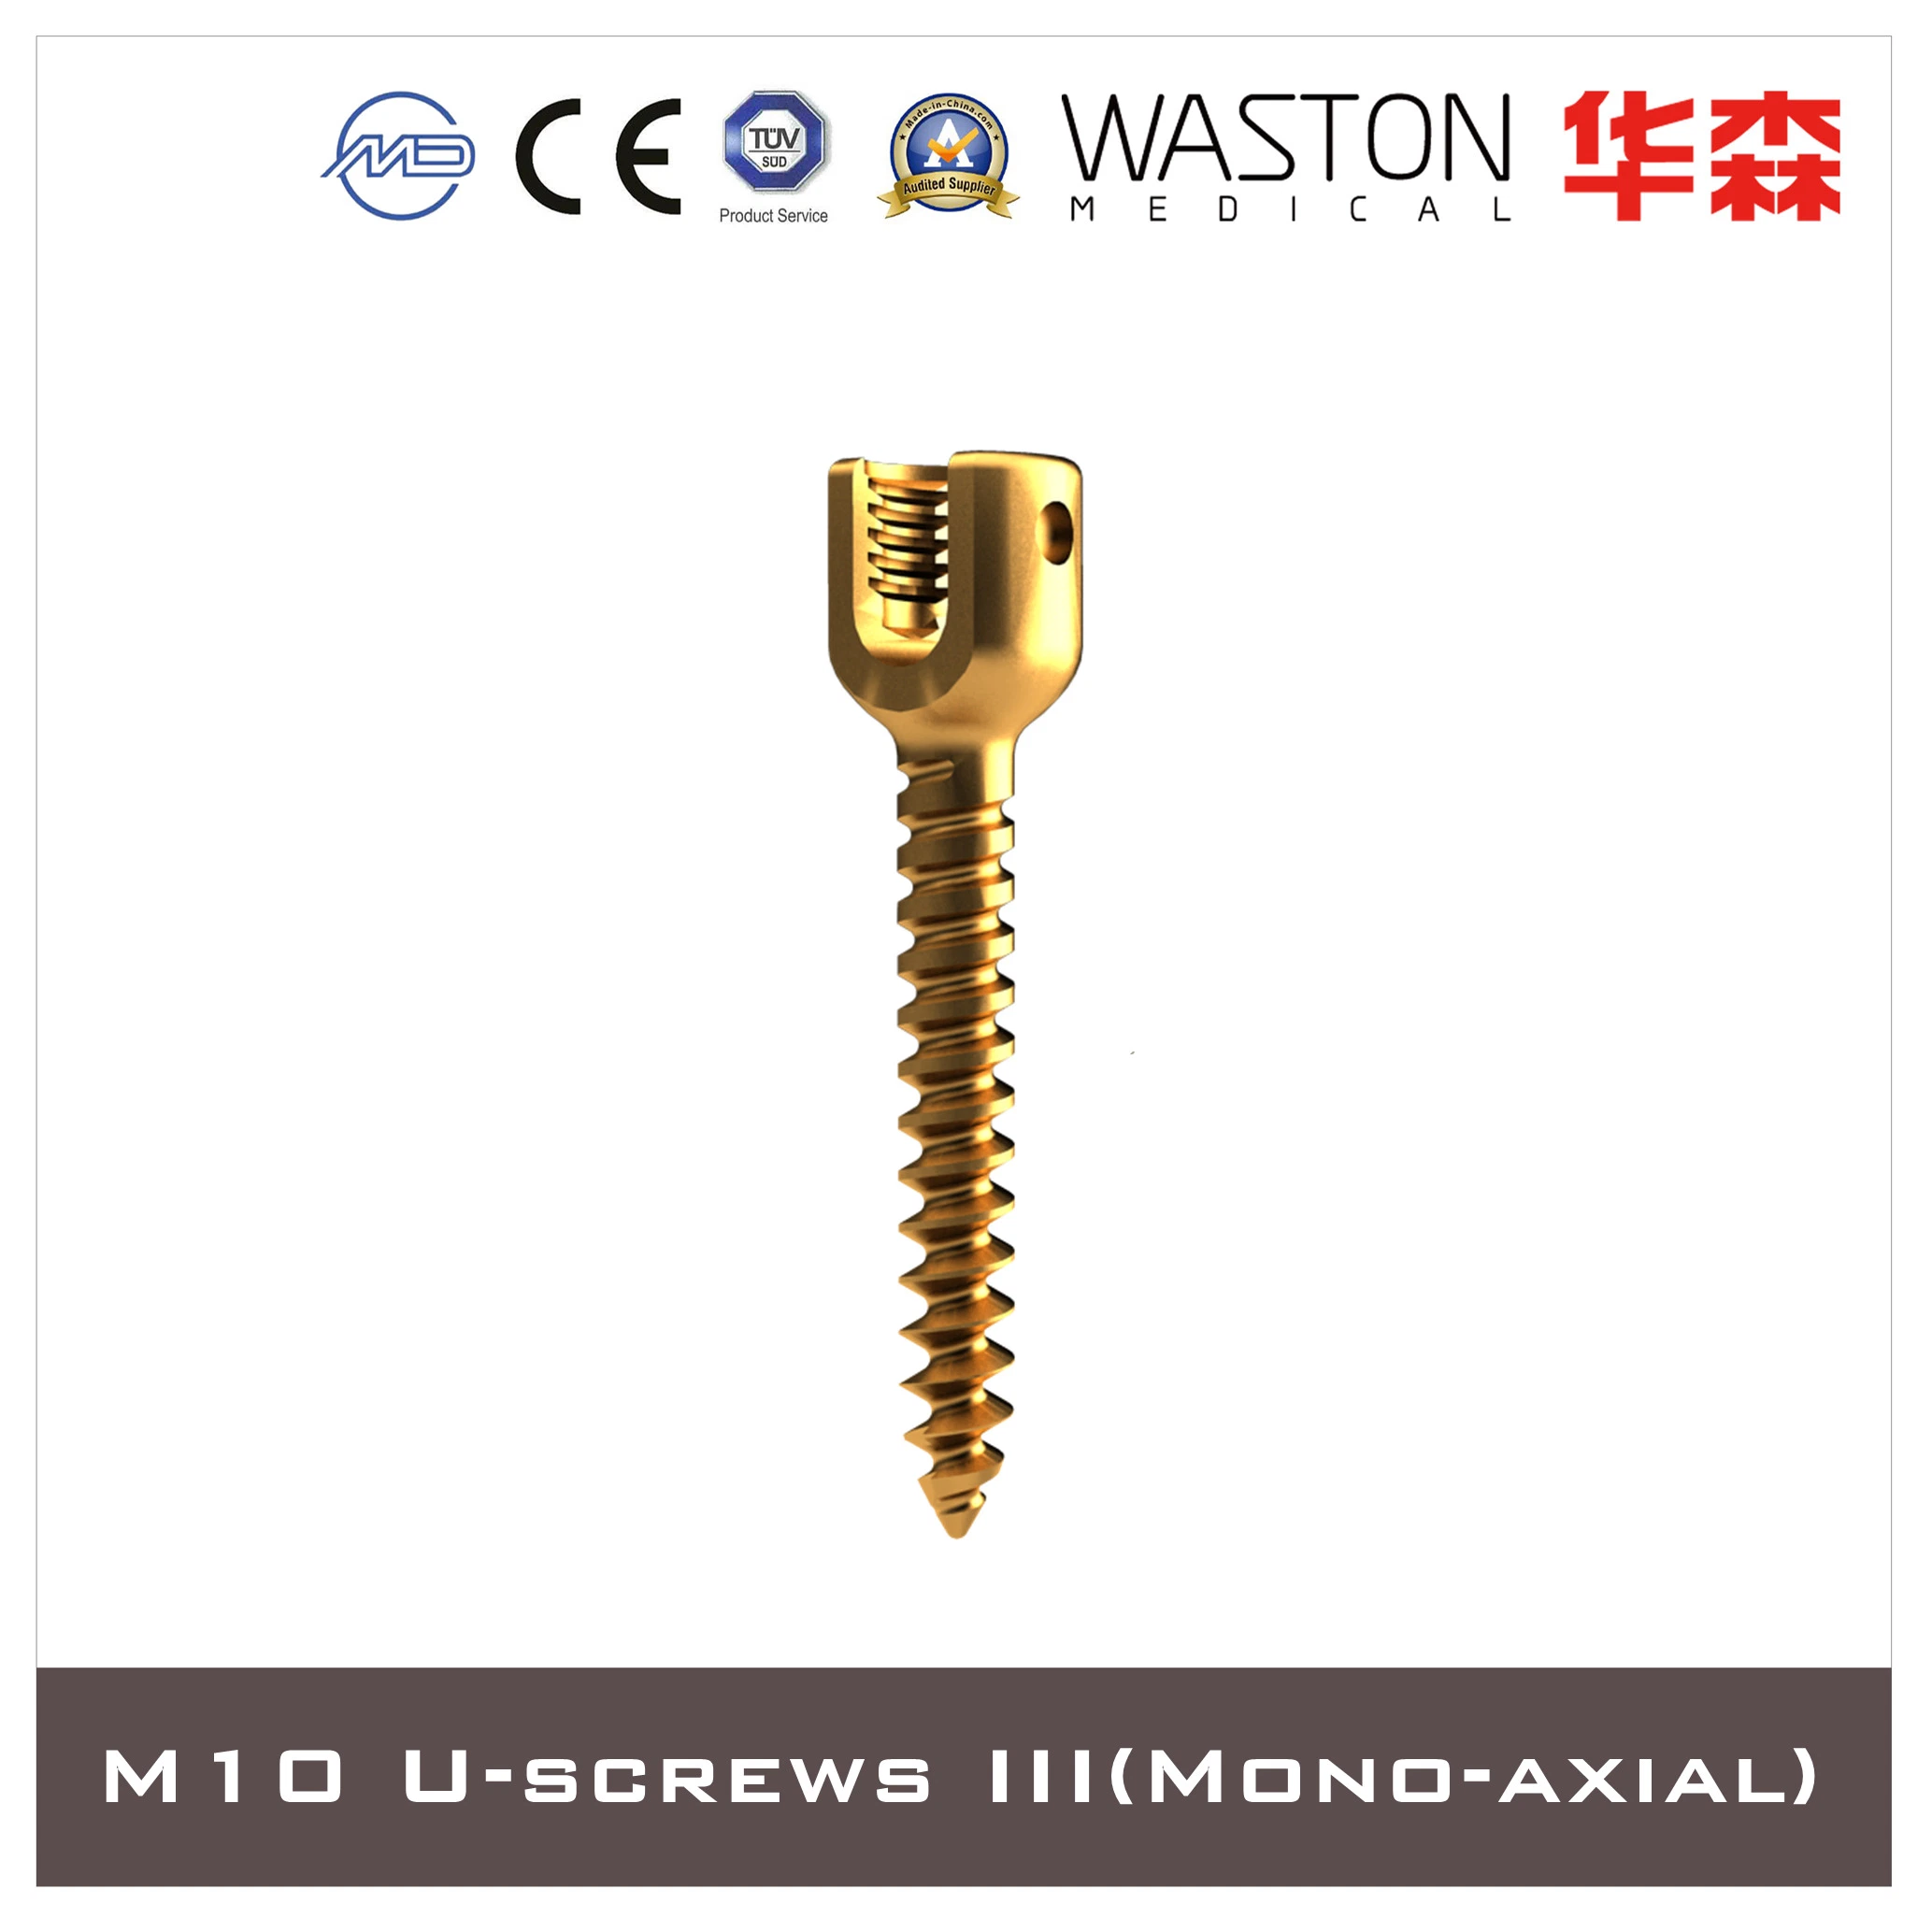 Pedicle Screws, Titanium Alloy, Orthopedic Implant, Spine, Surgical, Medical Instrument Set, with CE/ISO/FDA, Dislocation, Fracture, Lumber and Cervical Verterb